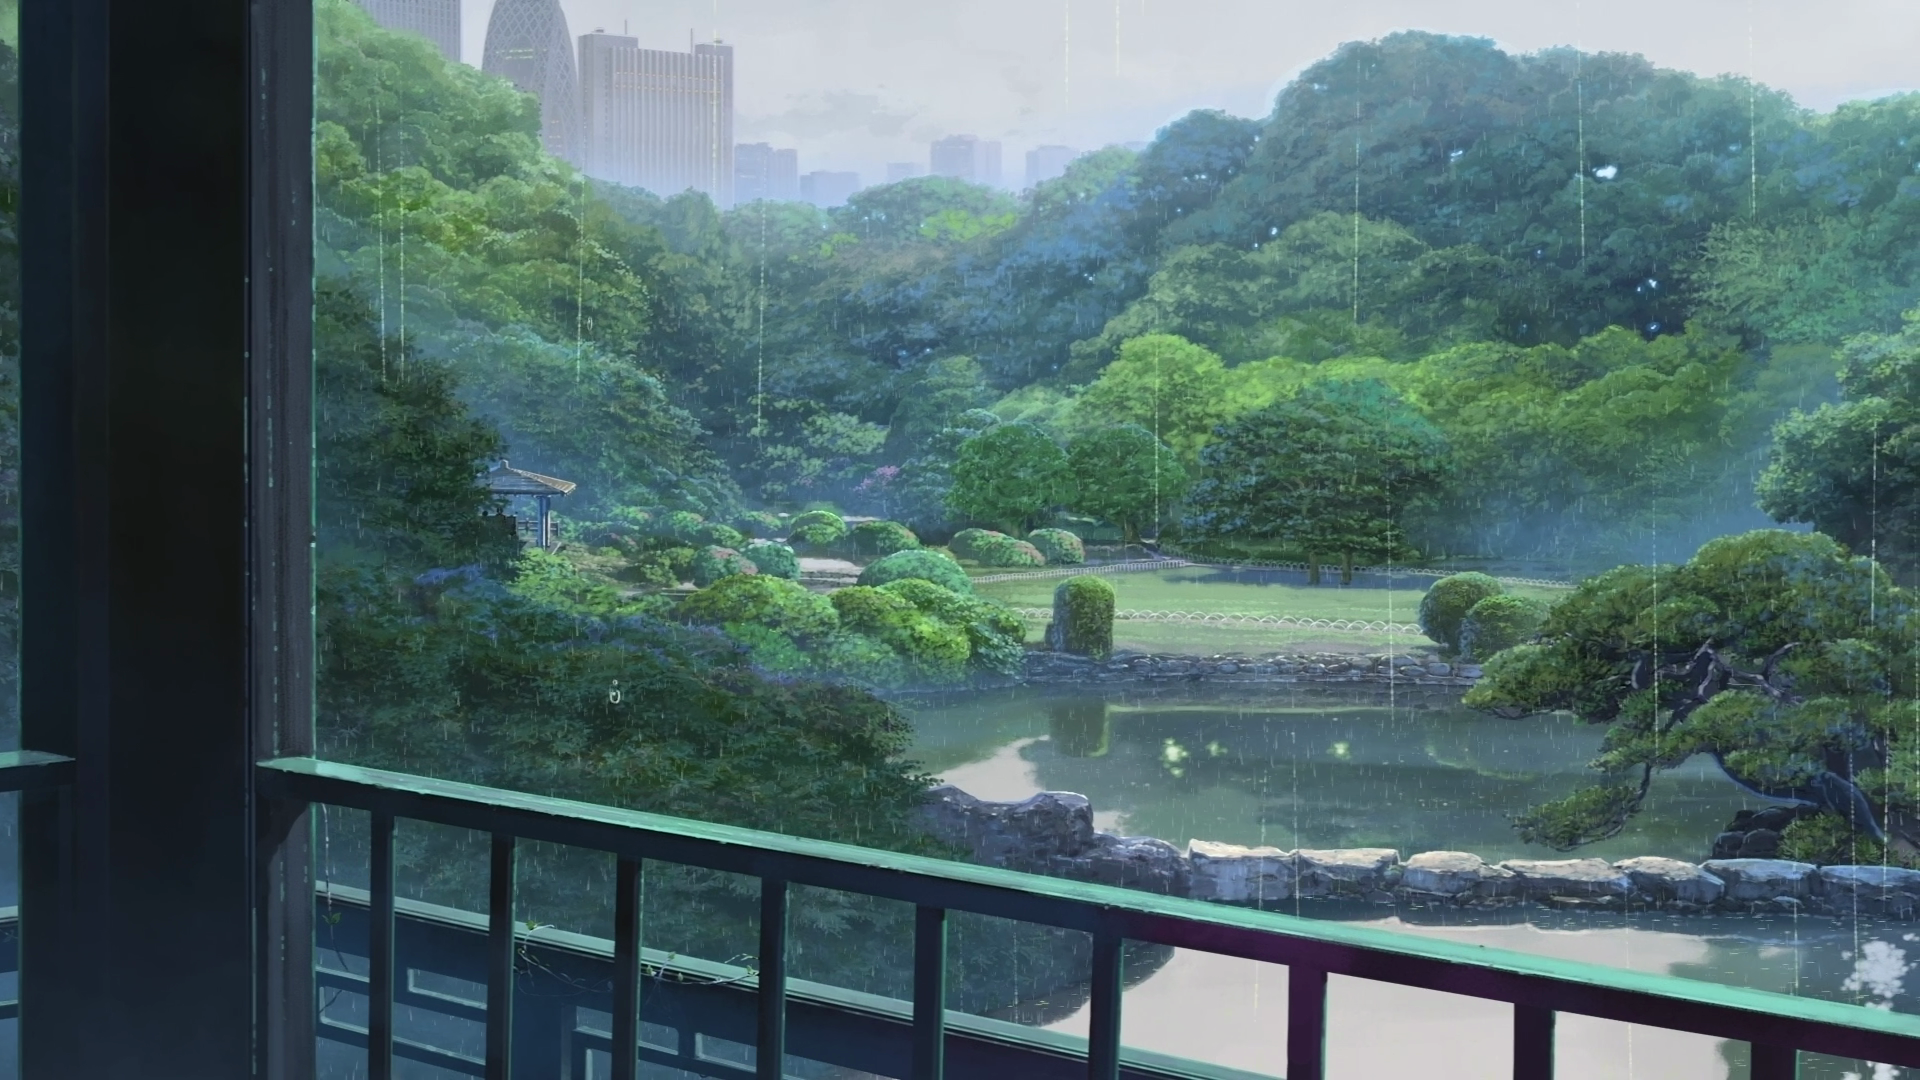 Beautiful 400 Outside house background anime for social media and desktop